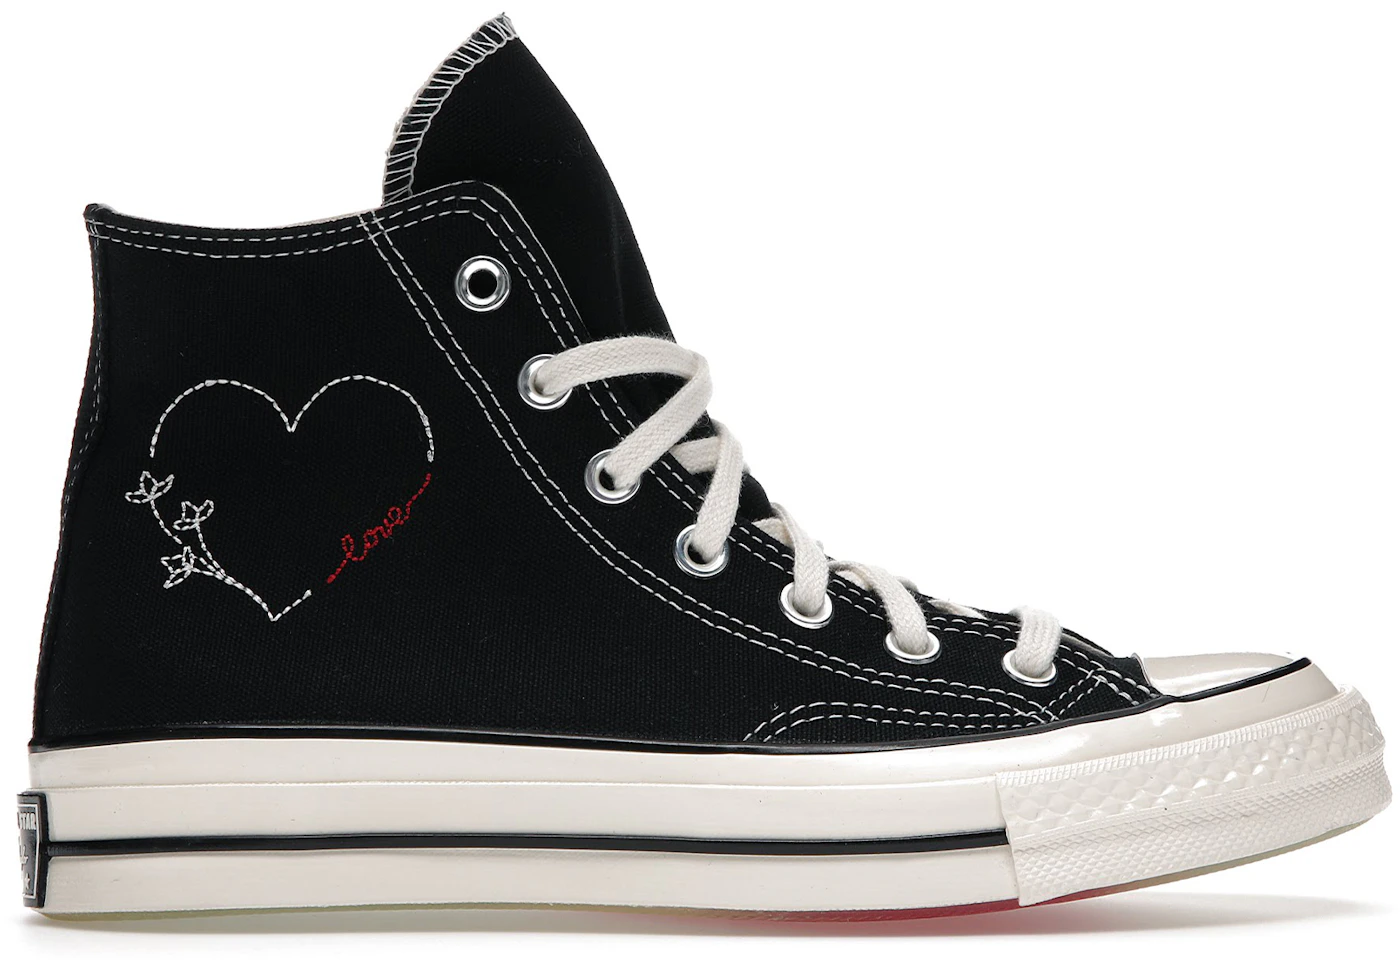 Converse Chuck Taylor All-Star Hearts Valentine's Day Vintage